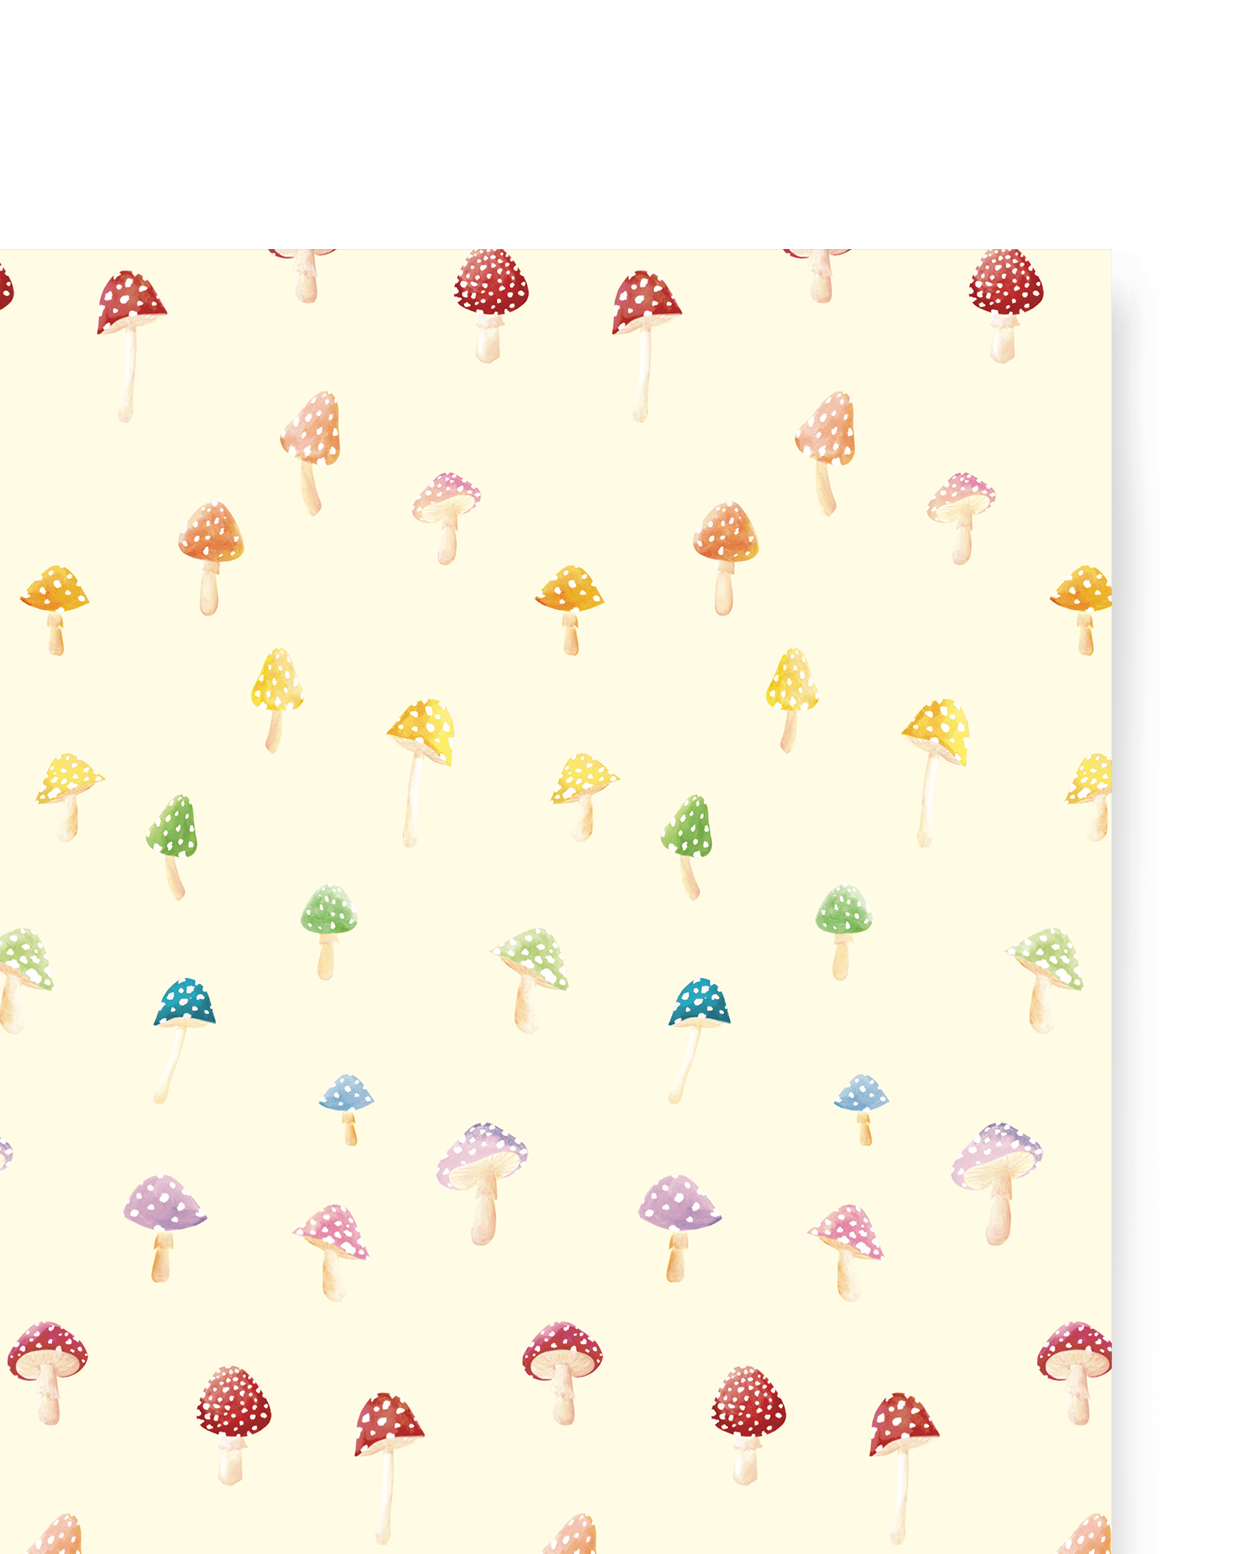 Vintage Inspired Mushroom Toadstool Wrapping Paper - Add a Nostalgic Touch  to Your Presents